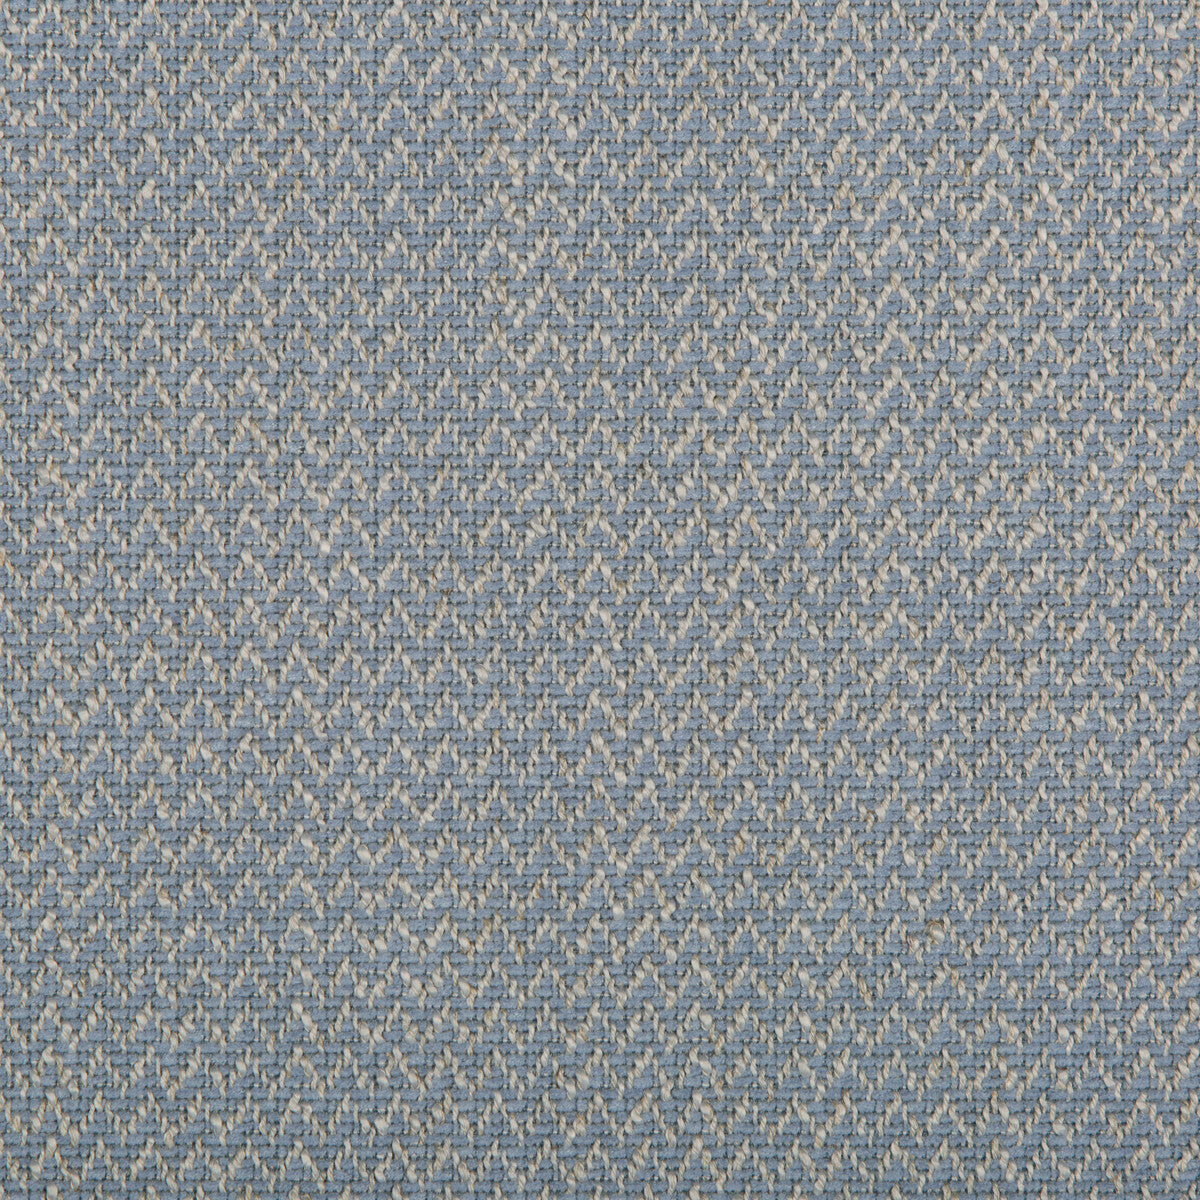 Kravet Contract fabric in 35408-5 color - pattern 35408.5.0 - by Kravet Contract in the Crypton Incase collection